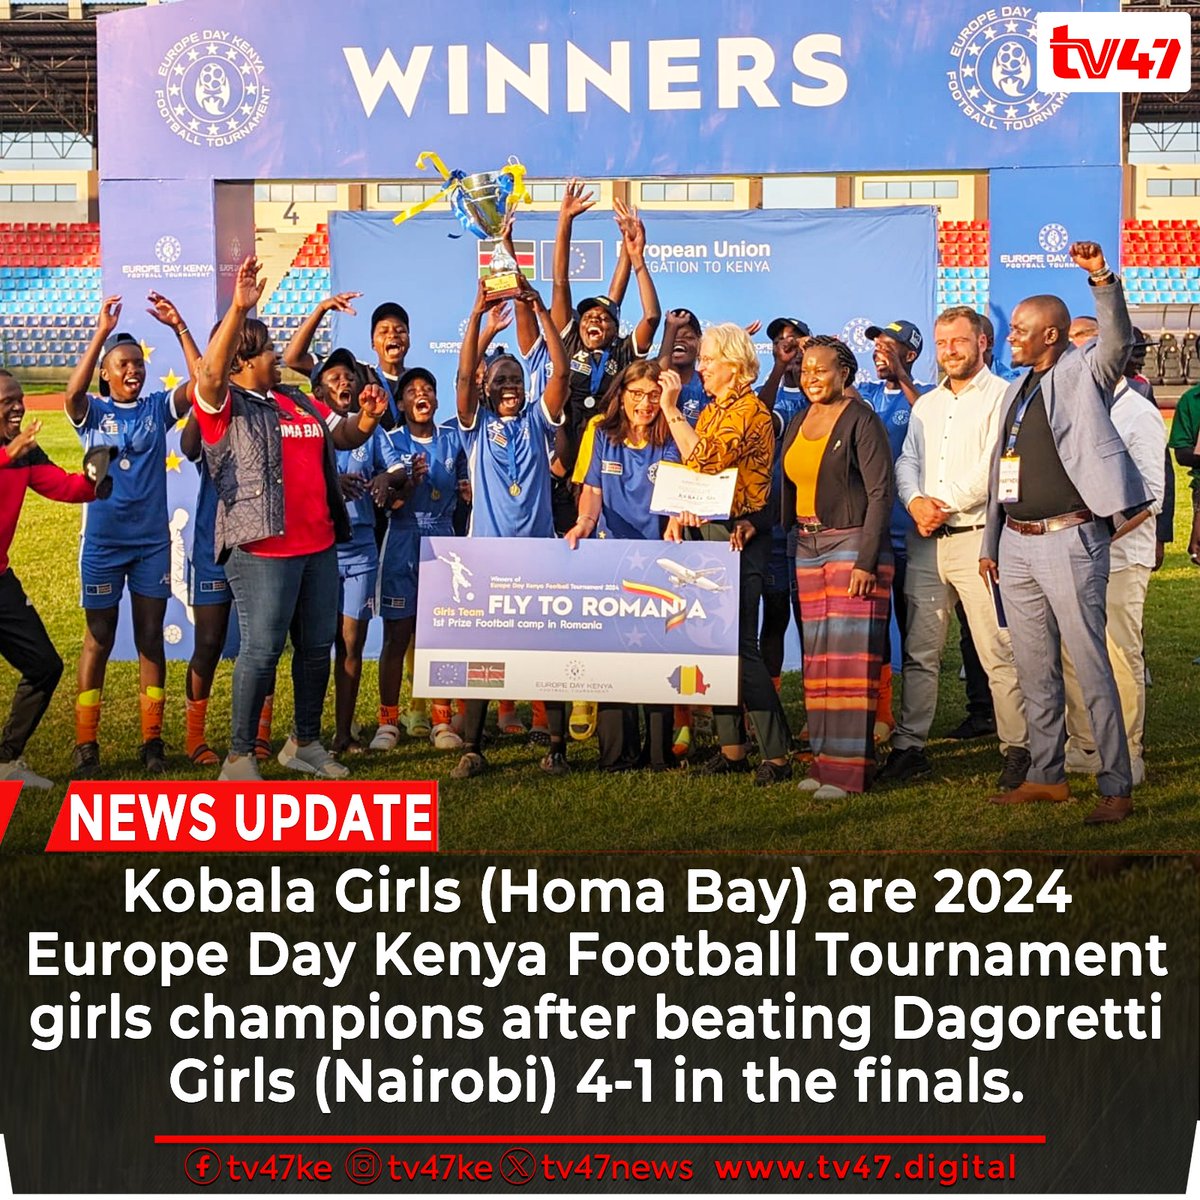 Kobala Girls (Homa Bay) are 2024 #EuropeDayKenya Football Tournament girls champions after beating Dagoretti Girls (Nairobi) 4-1 in the finals. The finals of the tournament -- meant to celebrate youth, diversity and the unifying power of football -- took place at Ulinzi Sports